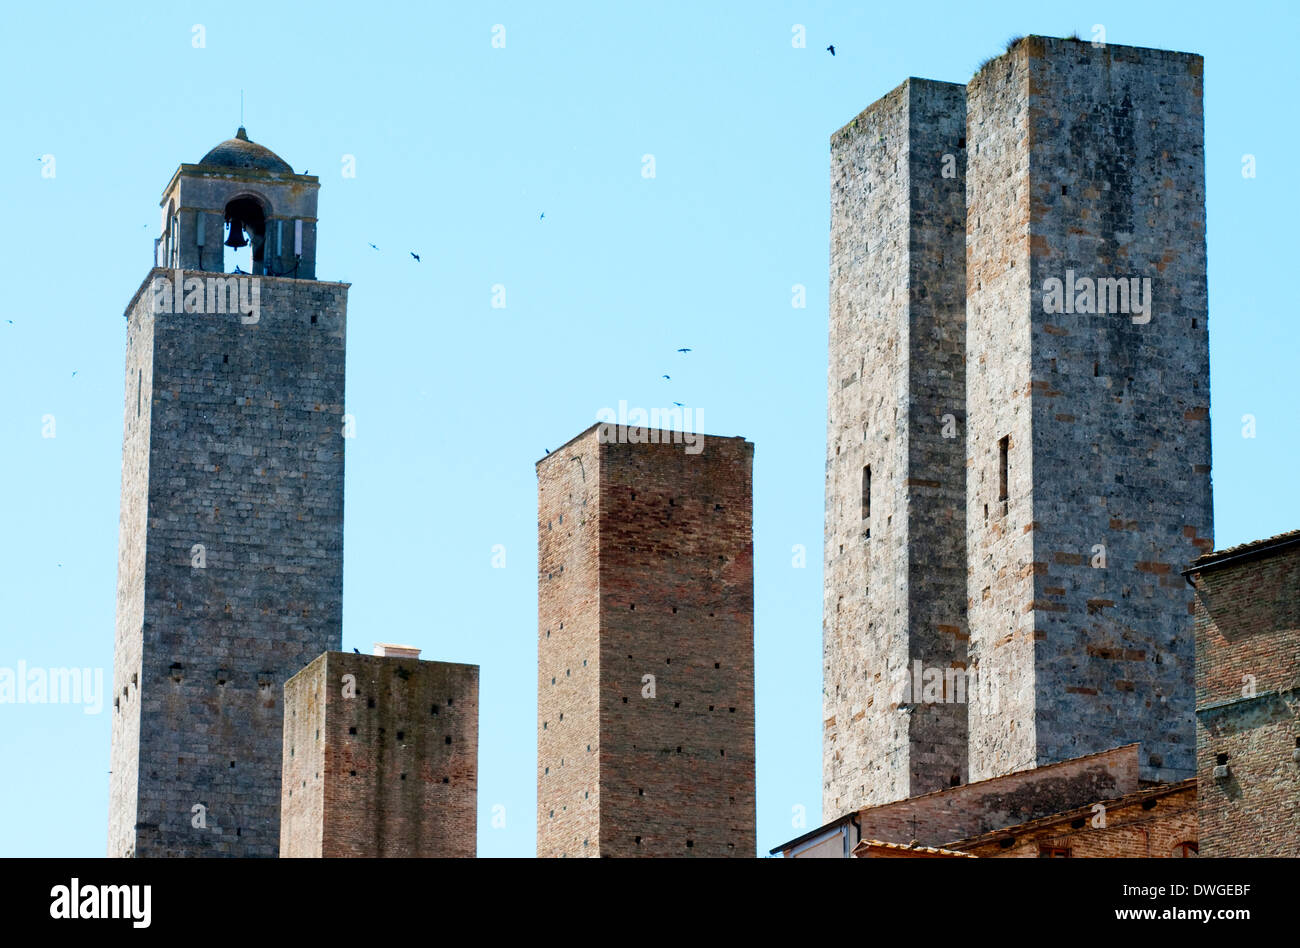 The Tower Houses of the medieval walled hill town of San Gimignano, Siena, Tuscany, Italy, Europe Stock Photo